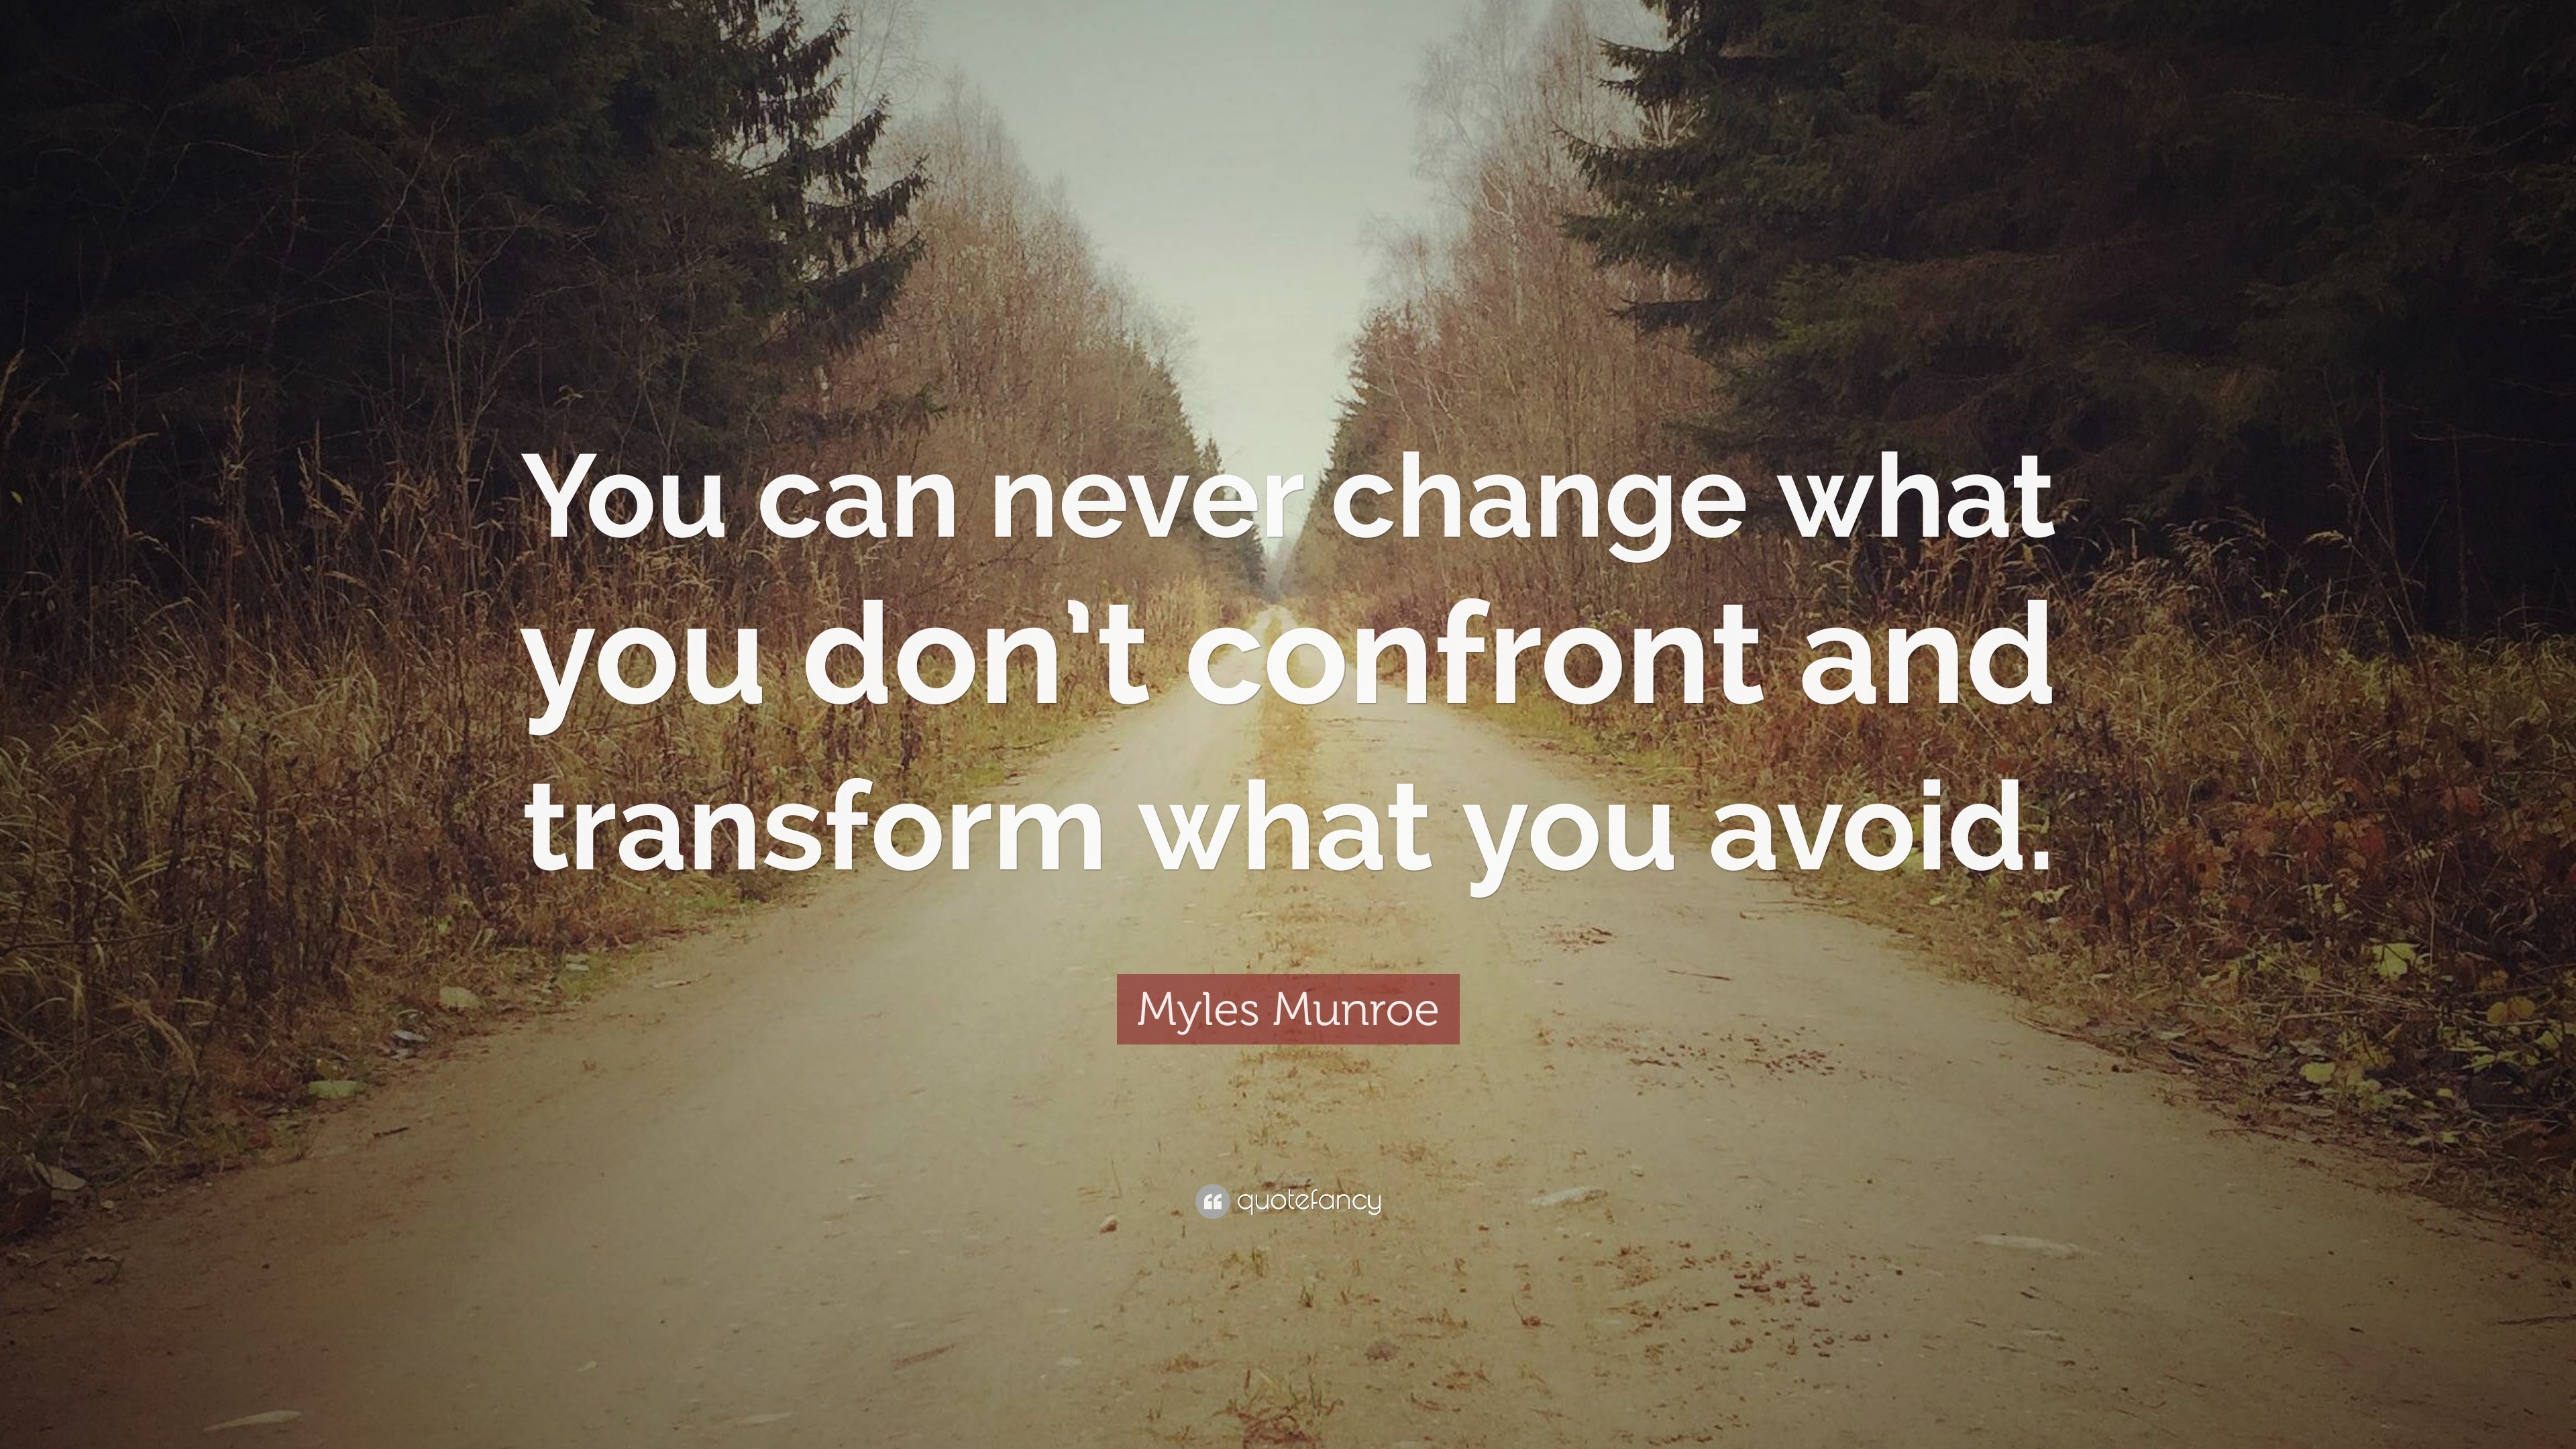 Myles Munroe Quote: “You can never change what you don’t confront and ...